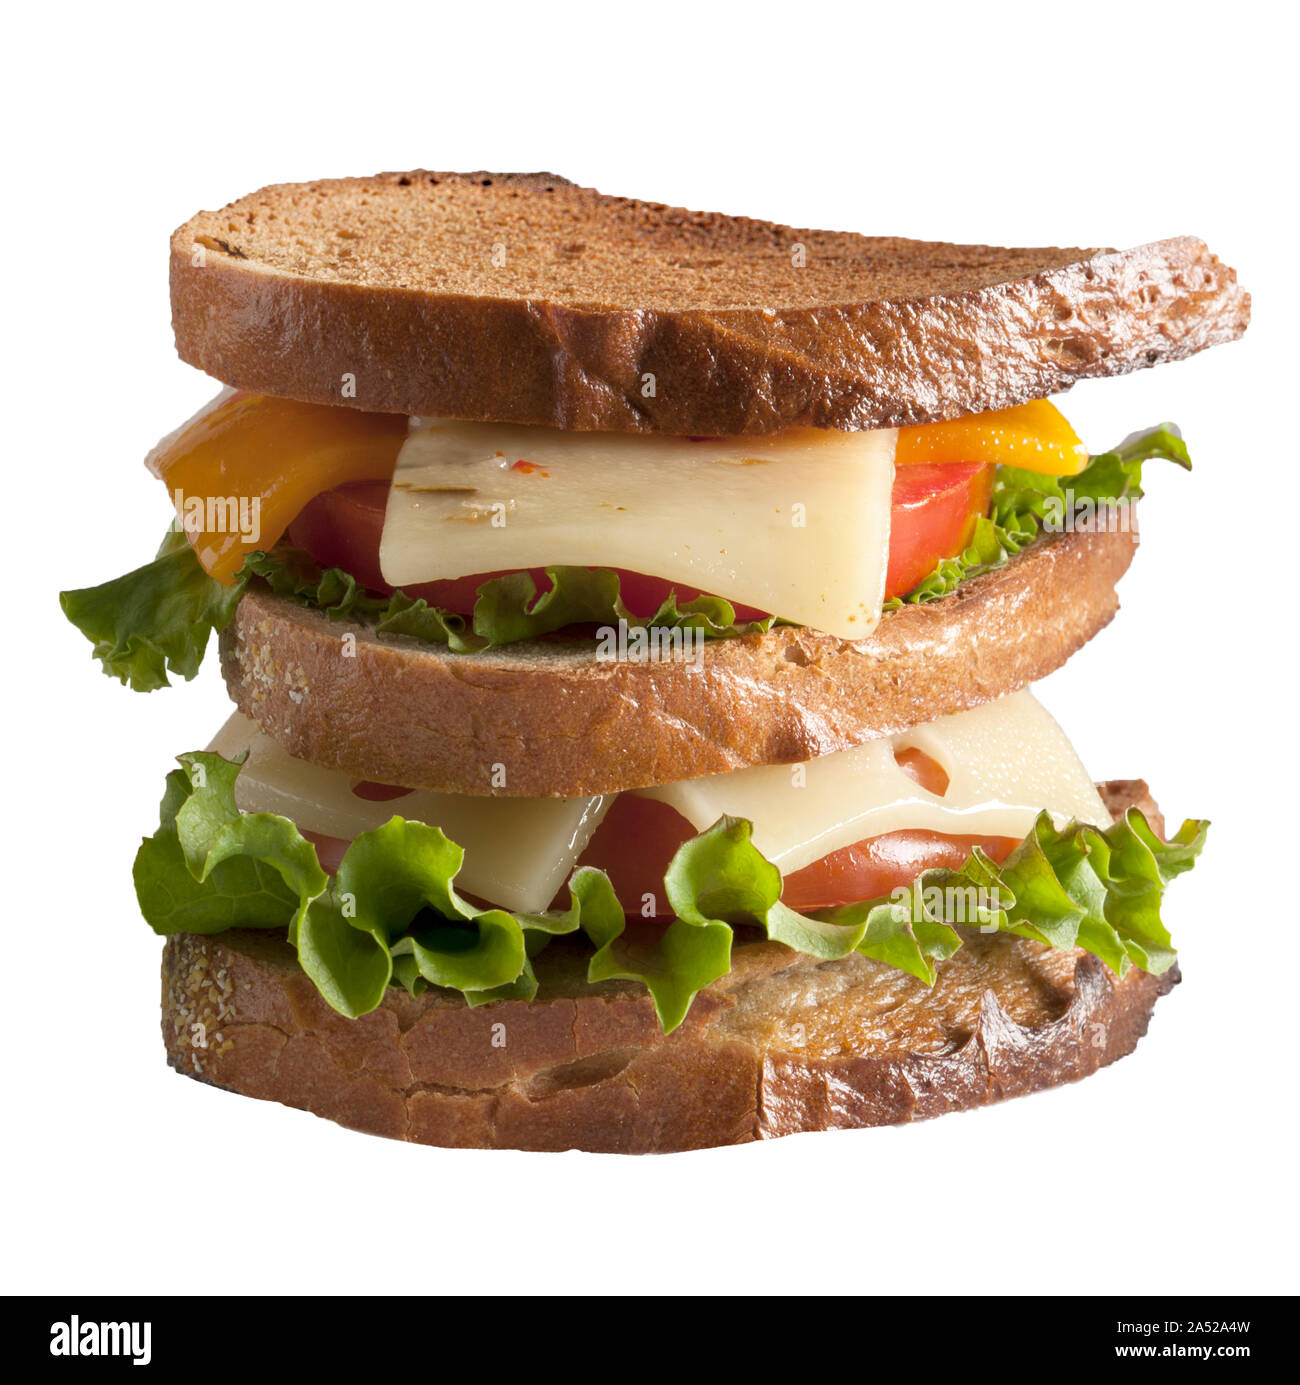 tomato lettuce and cheese sandwich Stock Photo